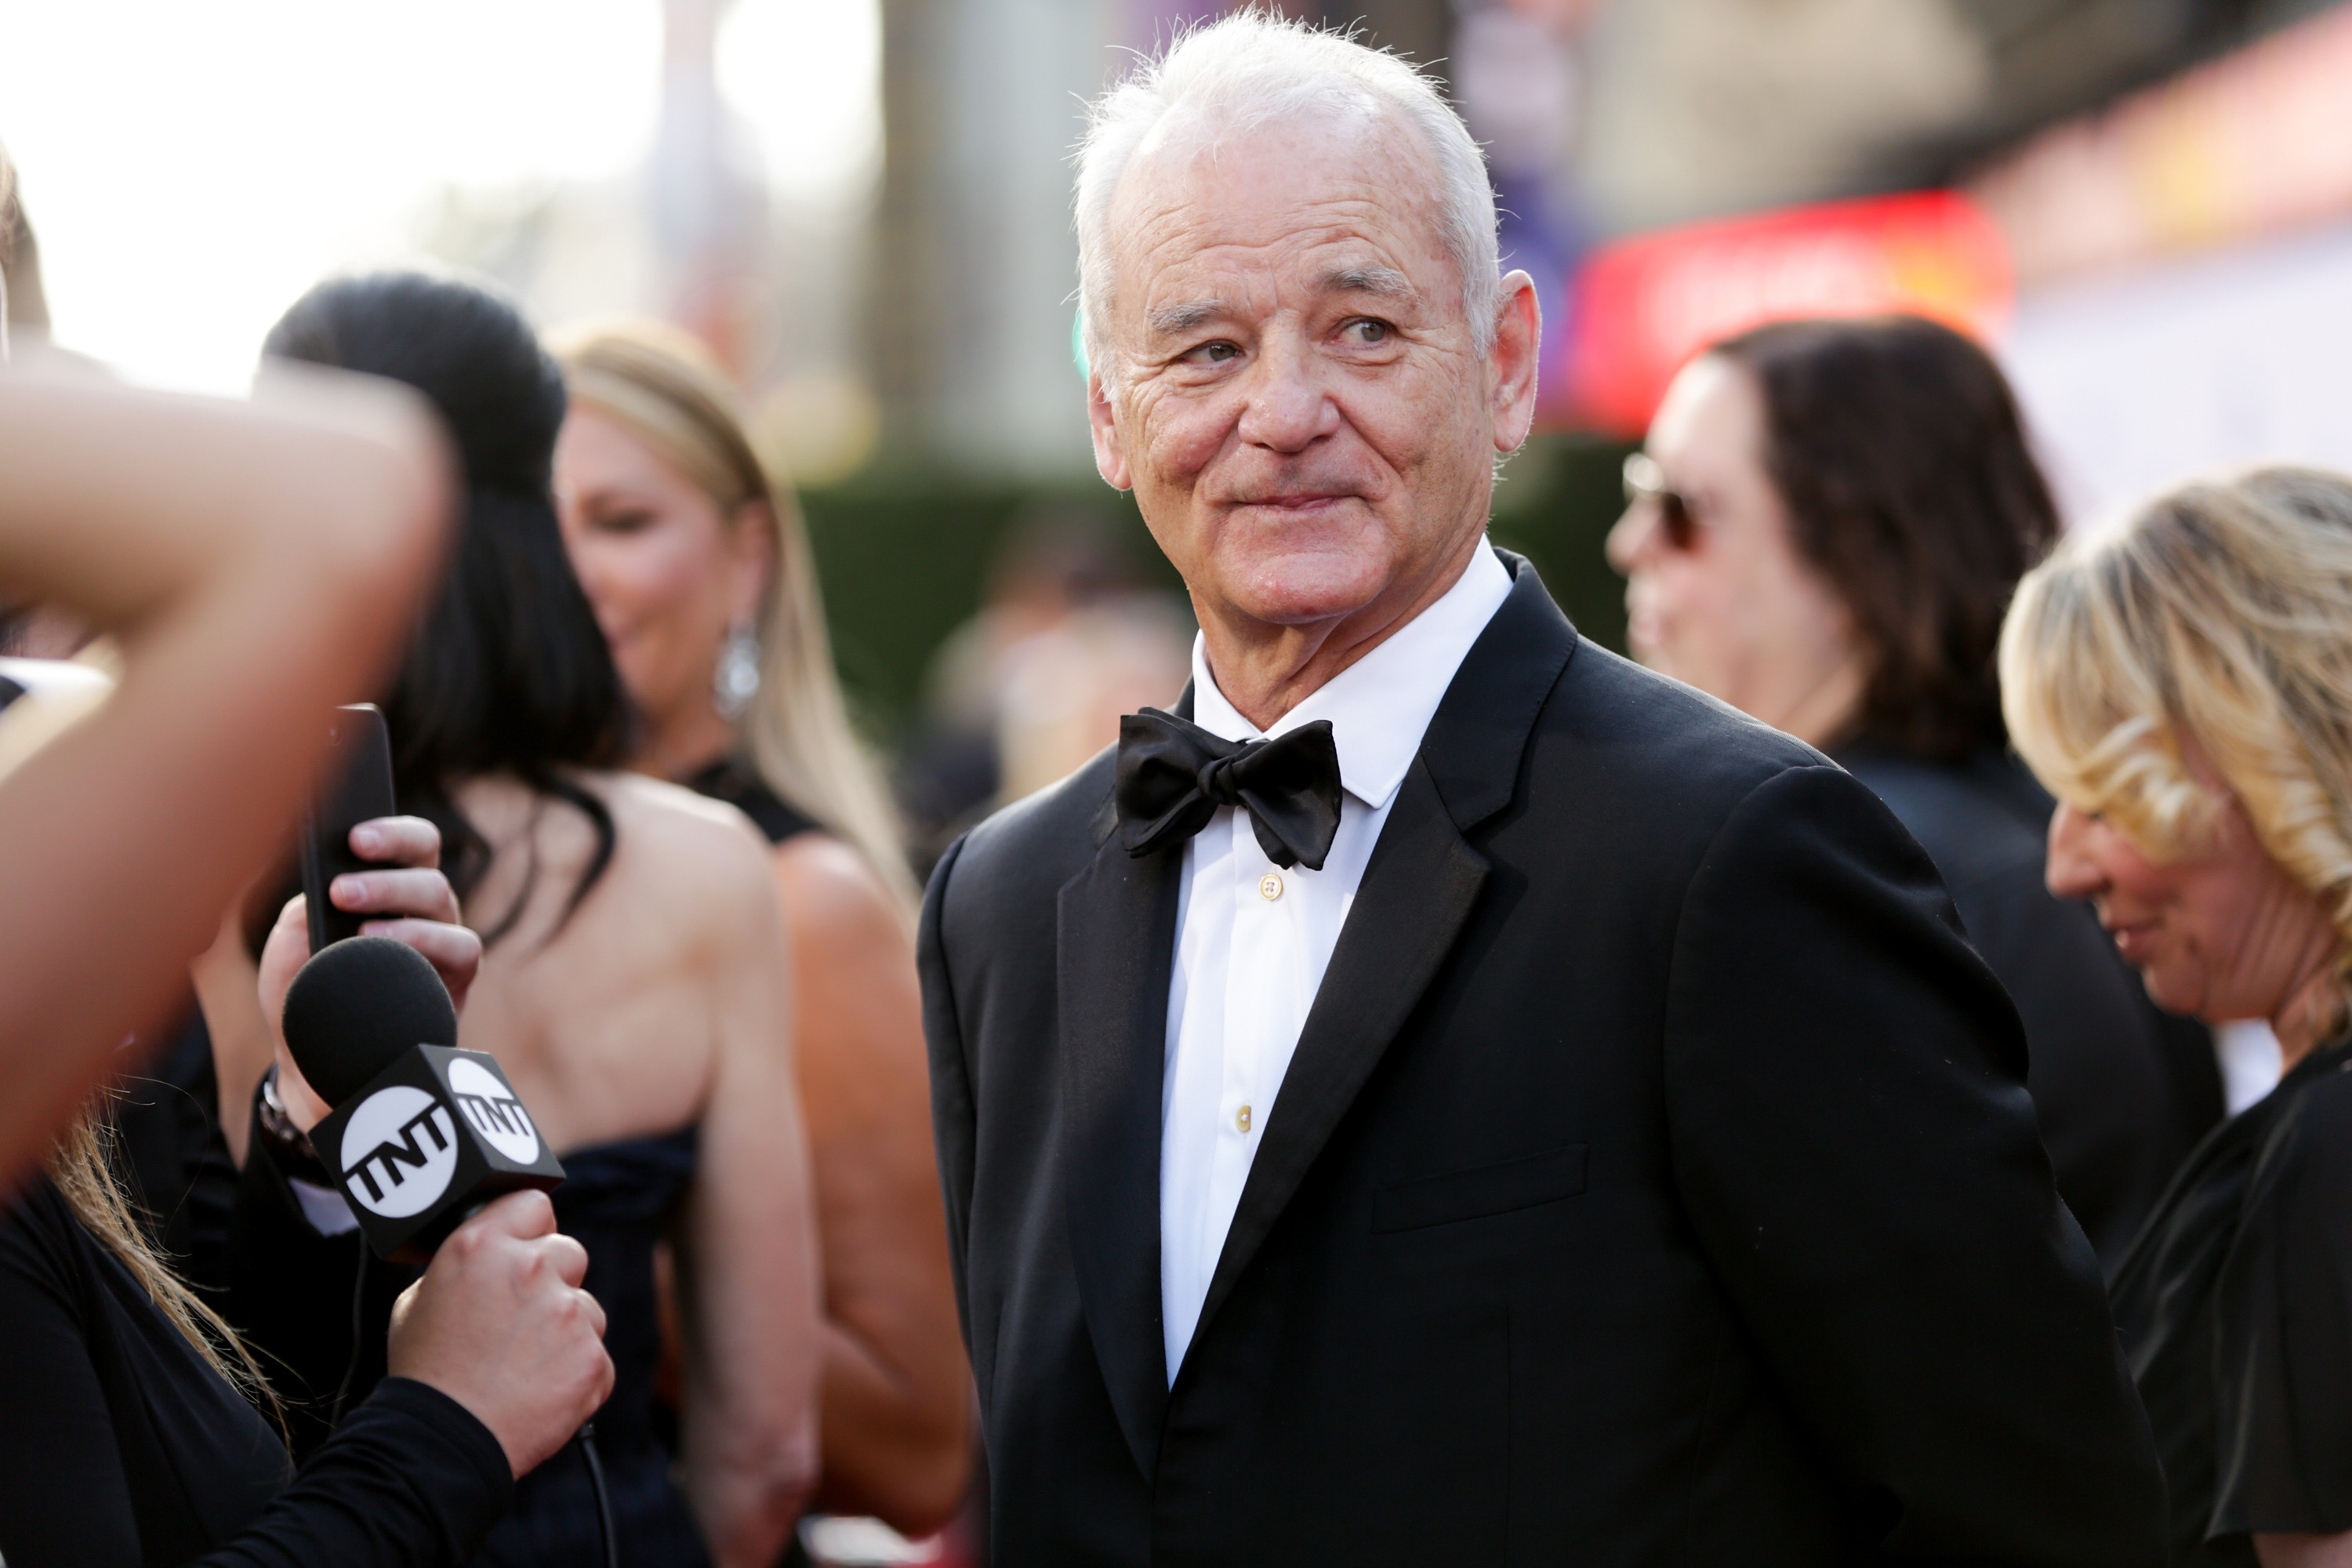 Bill Murray attends the American Film Institute’s 46th Life Achievement Award Gala Tribute to George Clooney at Dolby Theatre on June 7, 2018, in Hollywood